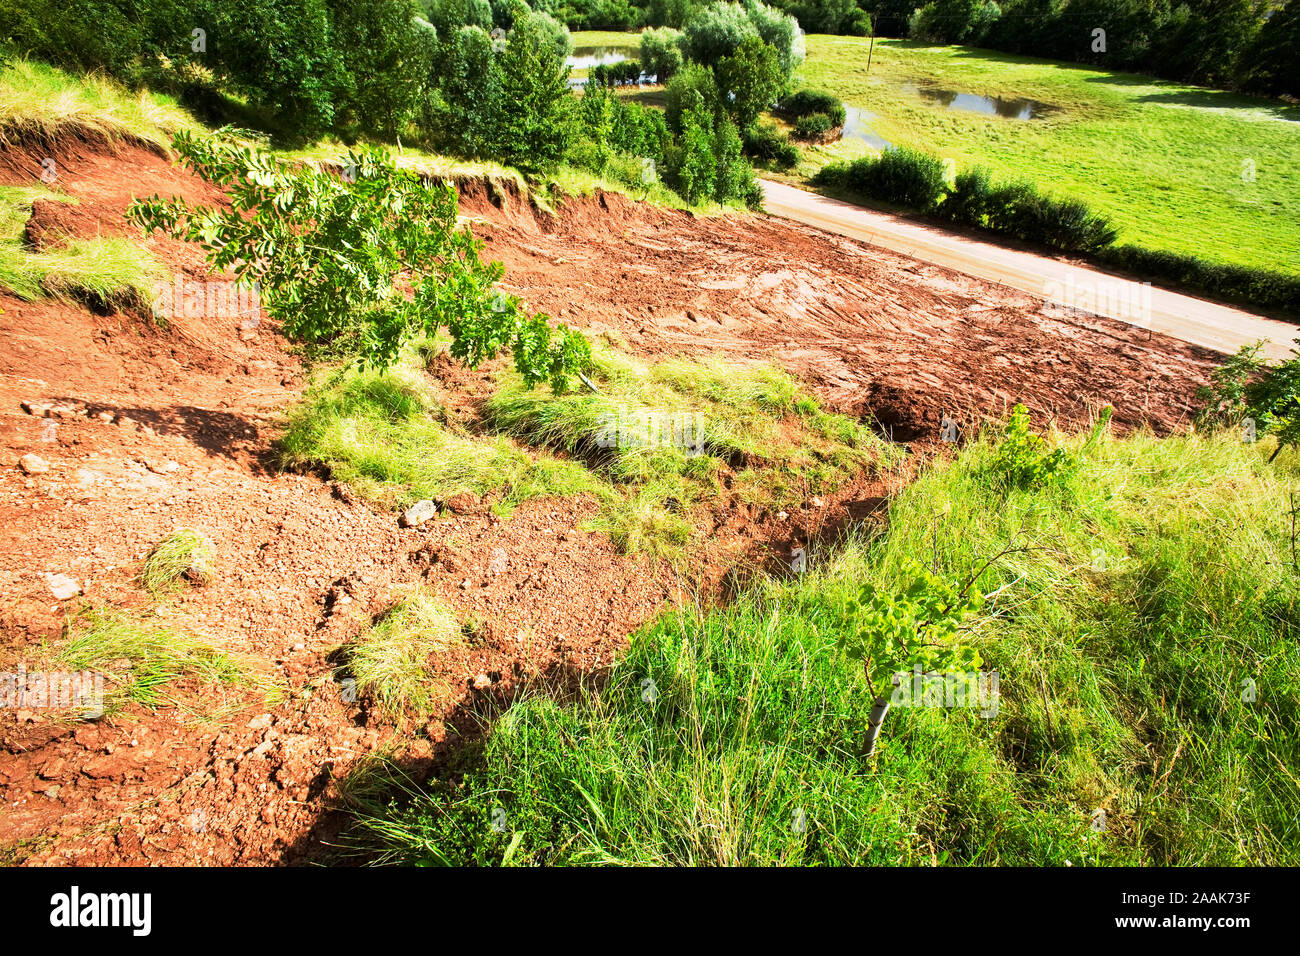 On Friday 20th July 2007 up to 5 inches of rain fell across central and southern England on already saturated ground. It caused this landslide due to Stock Photo